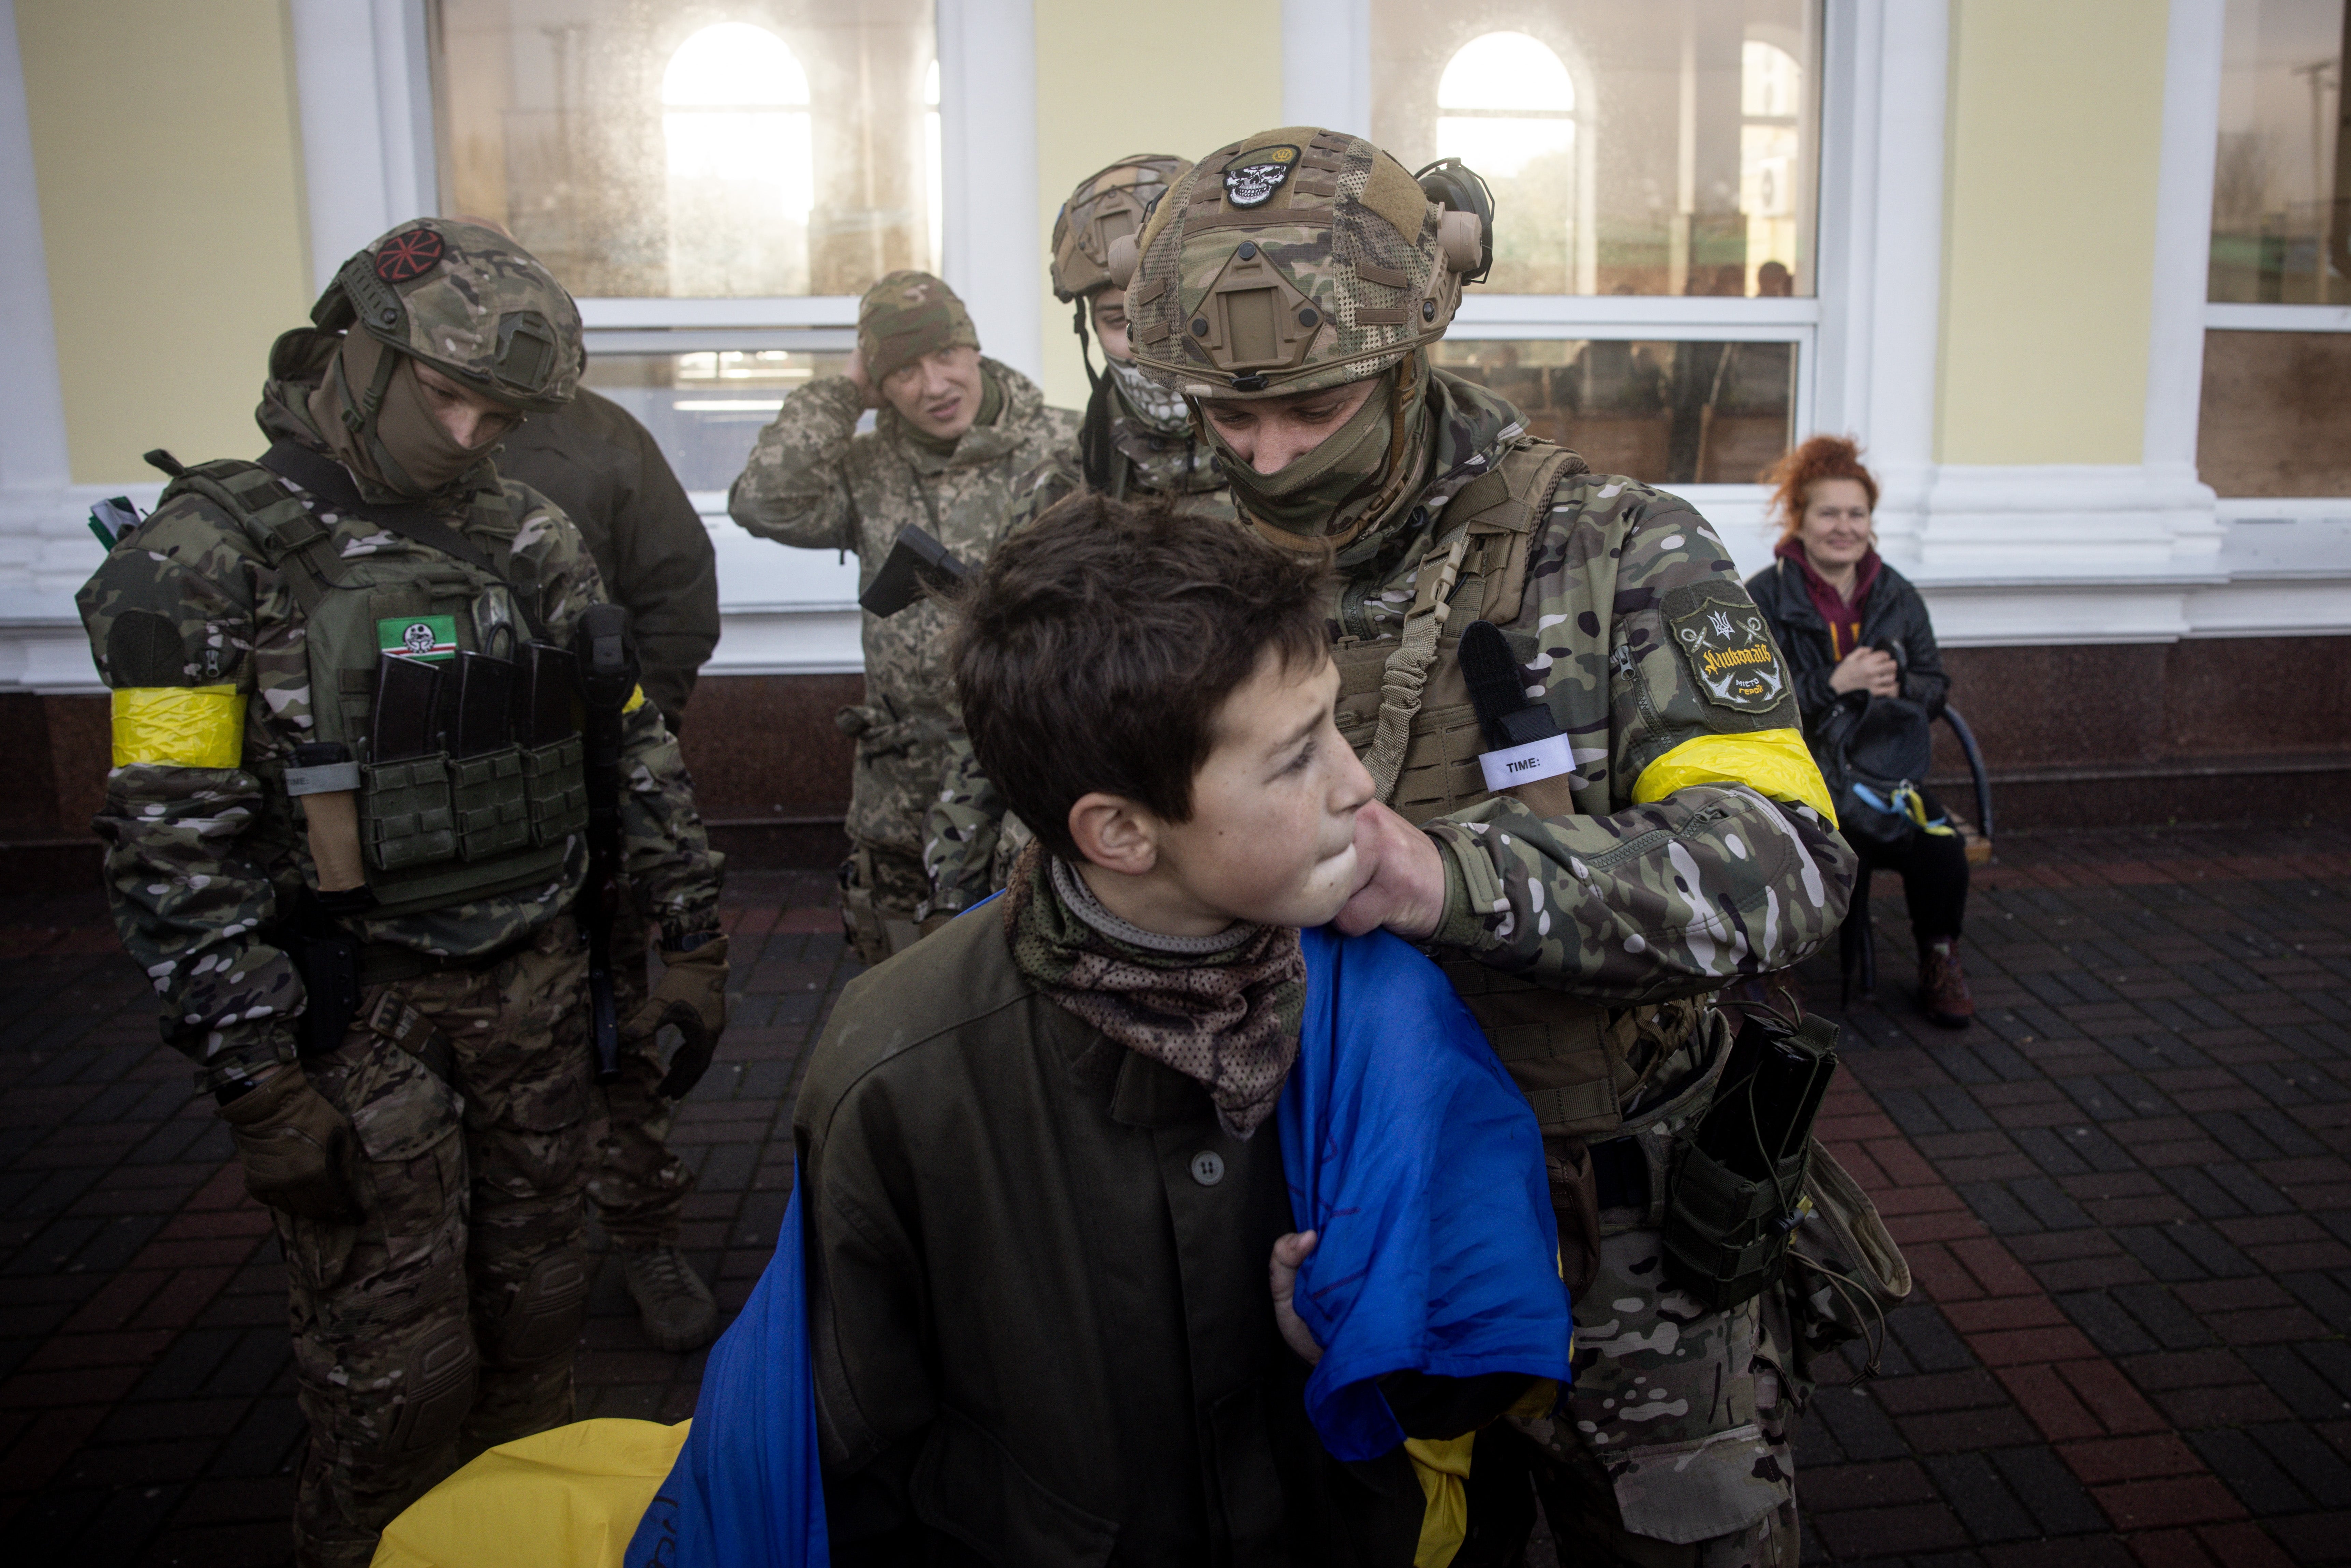 Children’s ‘torture chamber’ reported in Ukraine: official